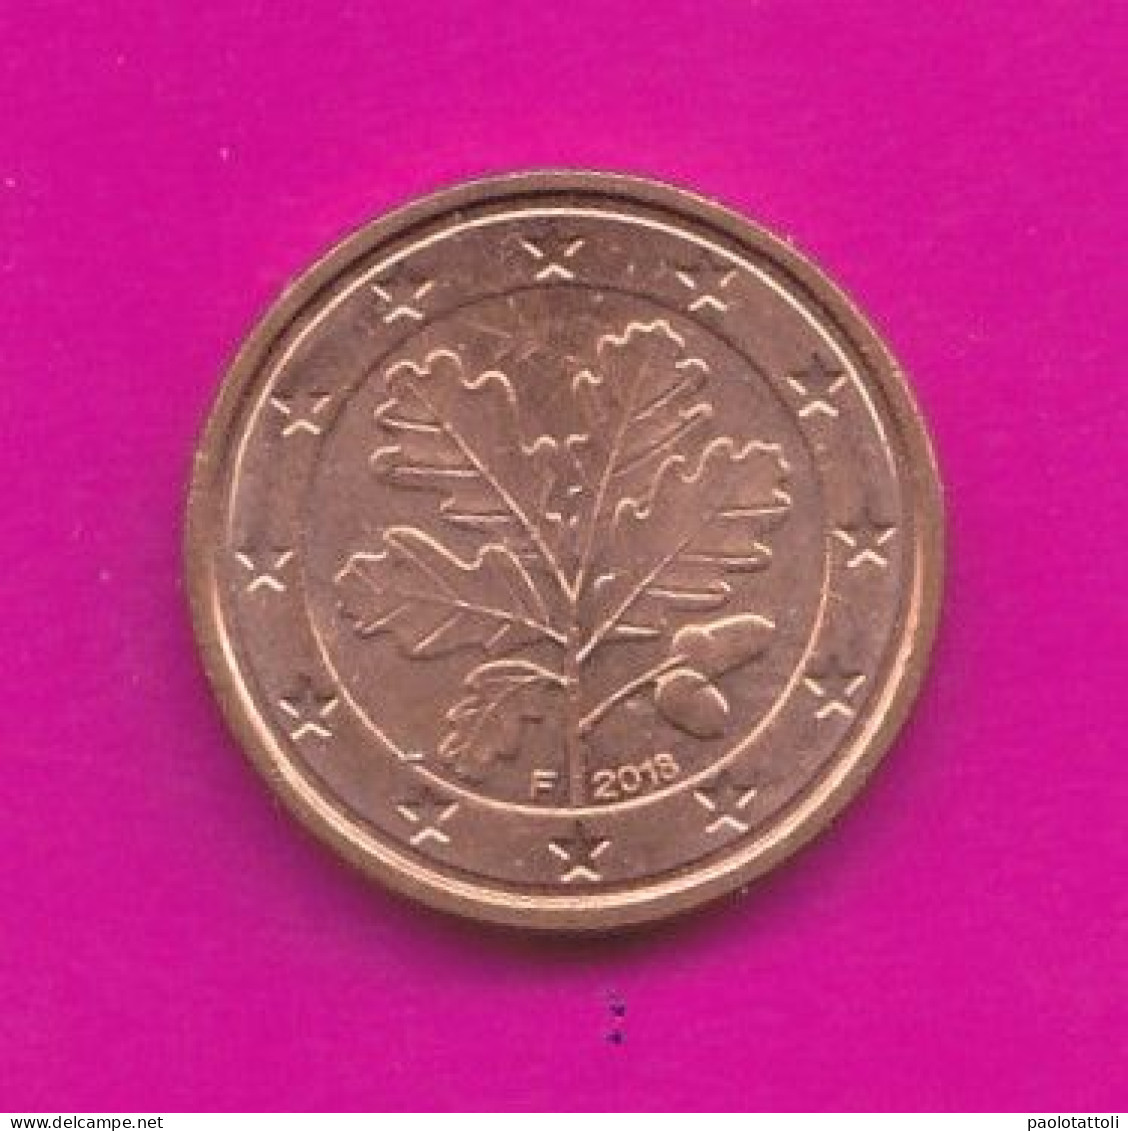 Germany, F 2018- 1 Euro Cent- Mint Of Stoccarda- Copper Plated Steel- Obverse Oak Leaf. Reverse Denomination- - Allemagne